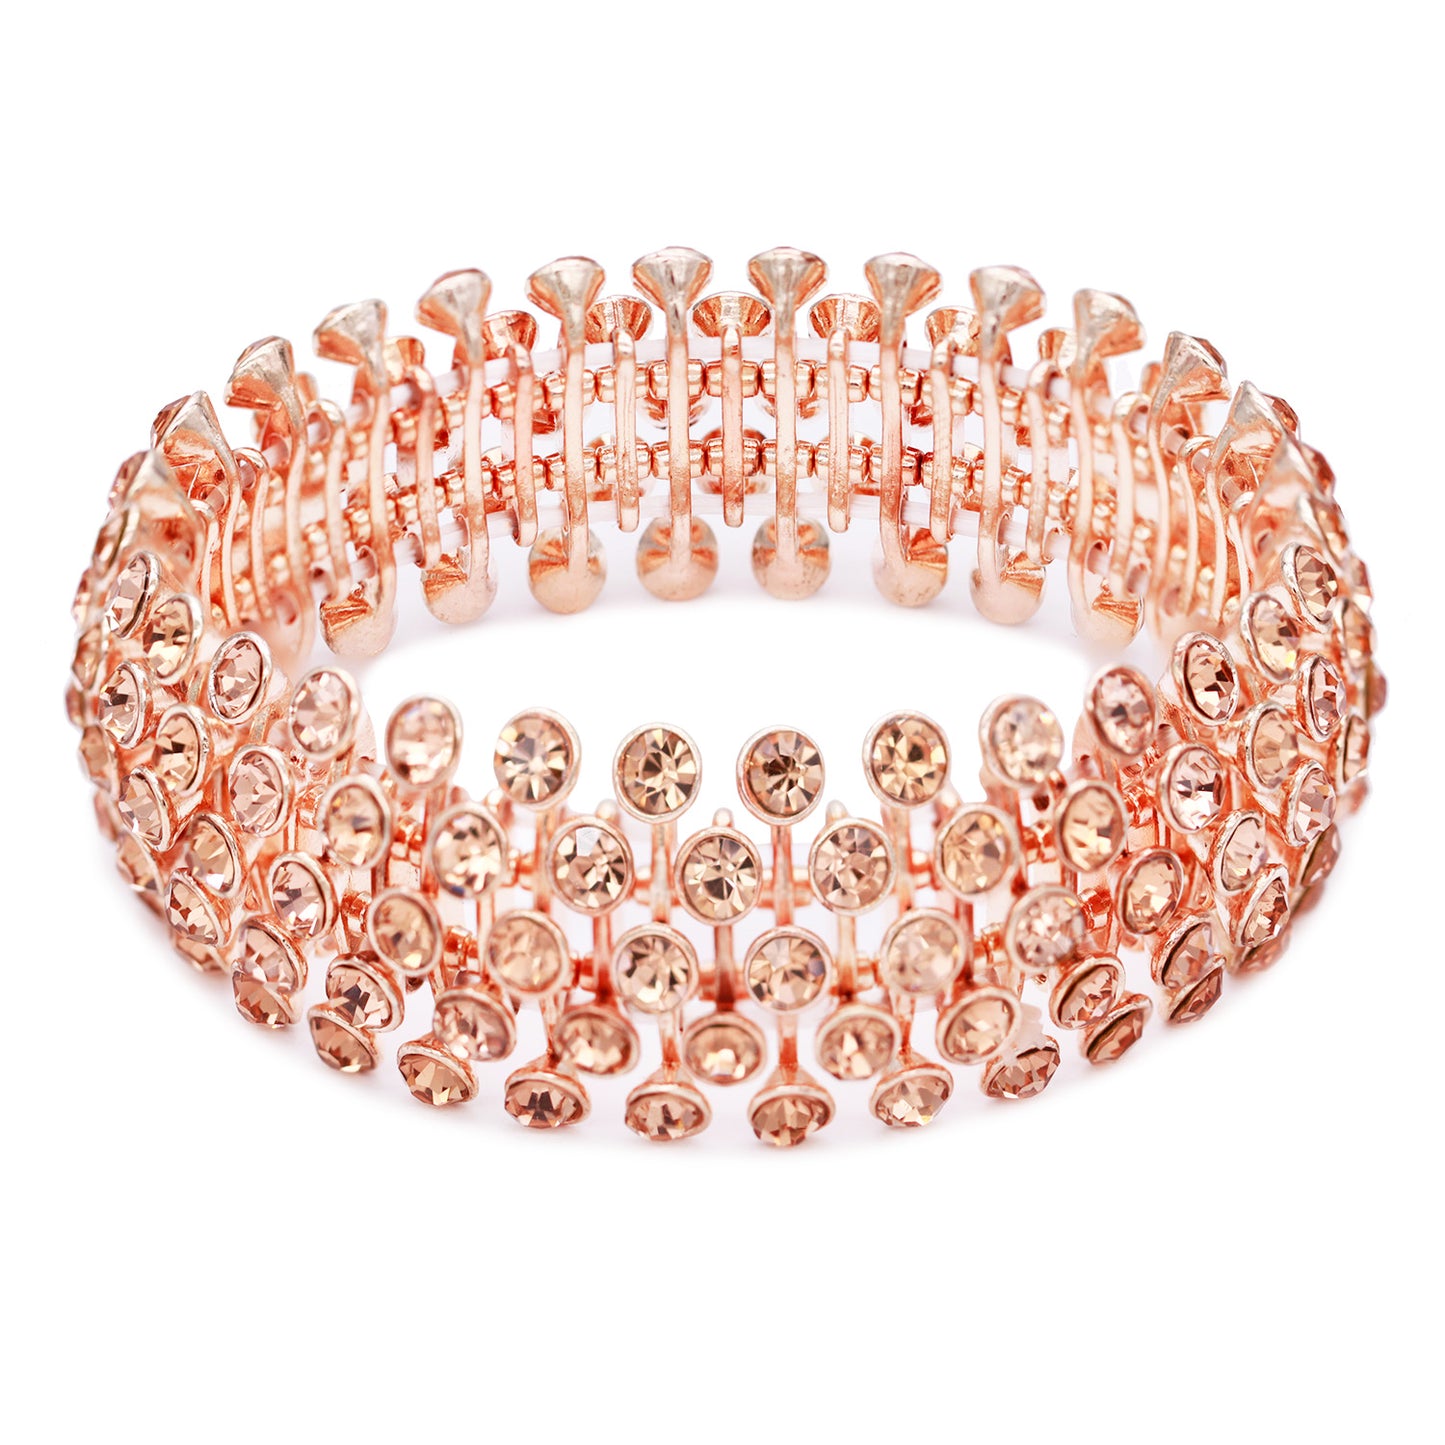 Lavencious Tennis 5 Row Rhinestone Stretch Bracelets Bridal Evening Party Jewelry For Woman Bangle (Rose Gold)